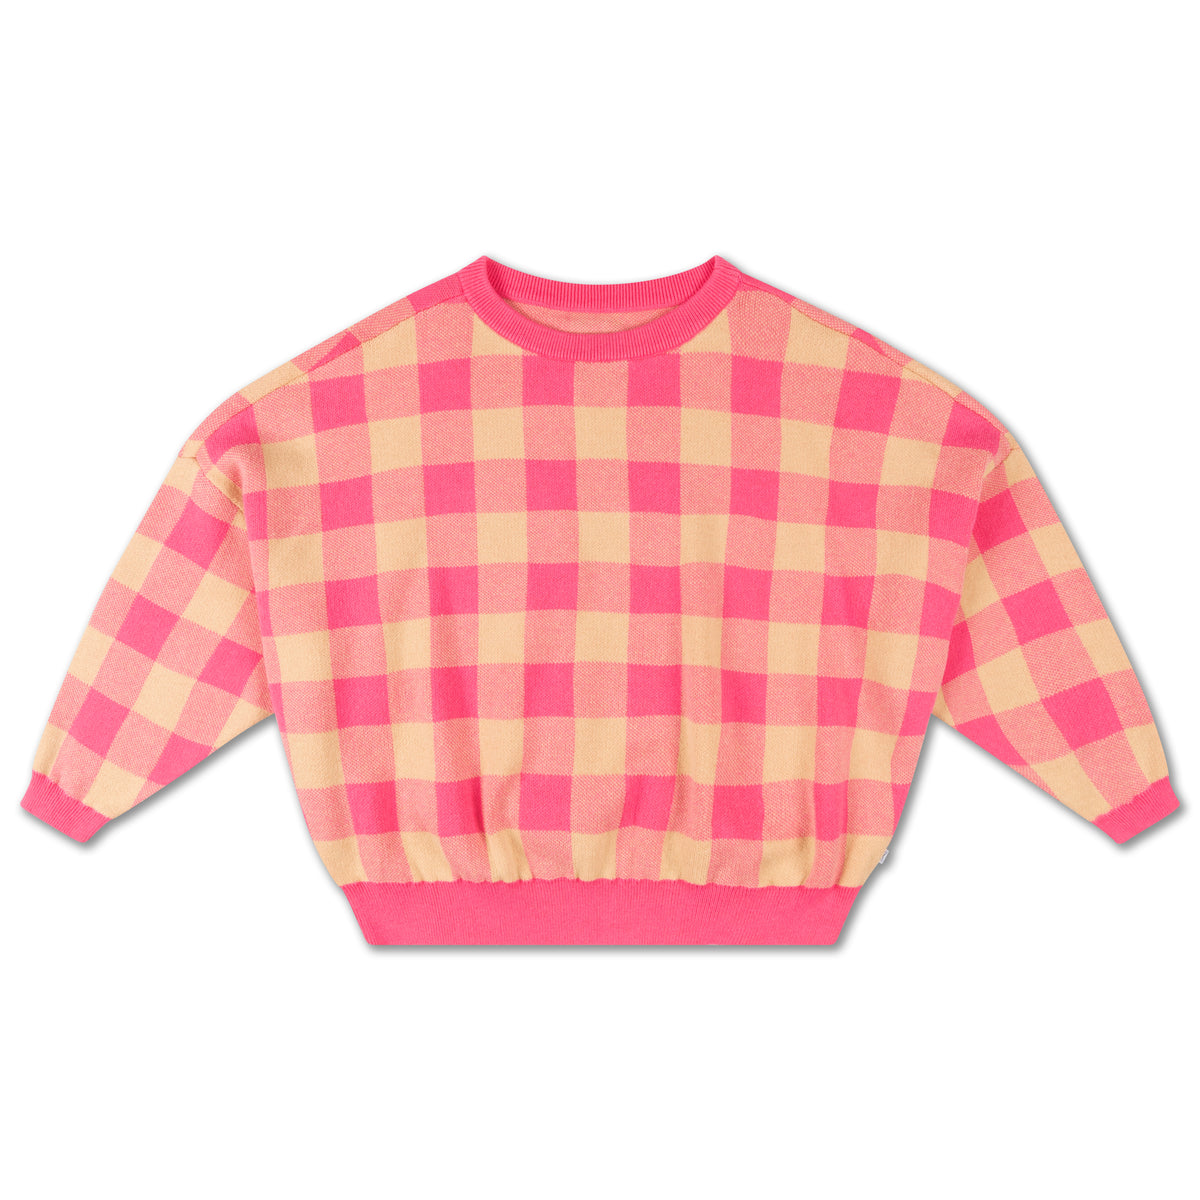 Knit Slouchy Sweater in Pop Pink Check by Repose AMS – Hornby 